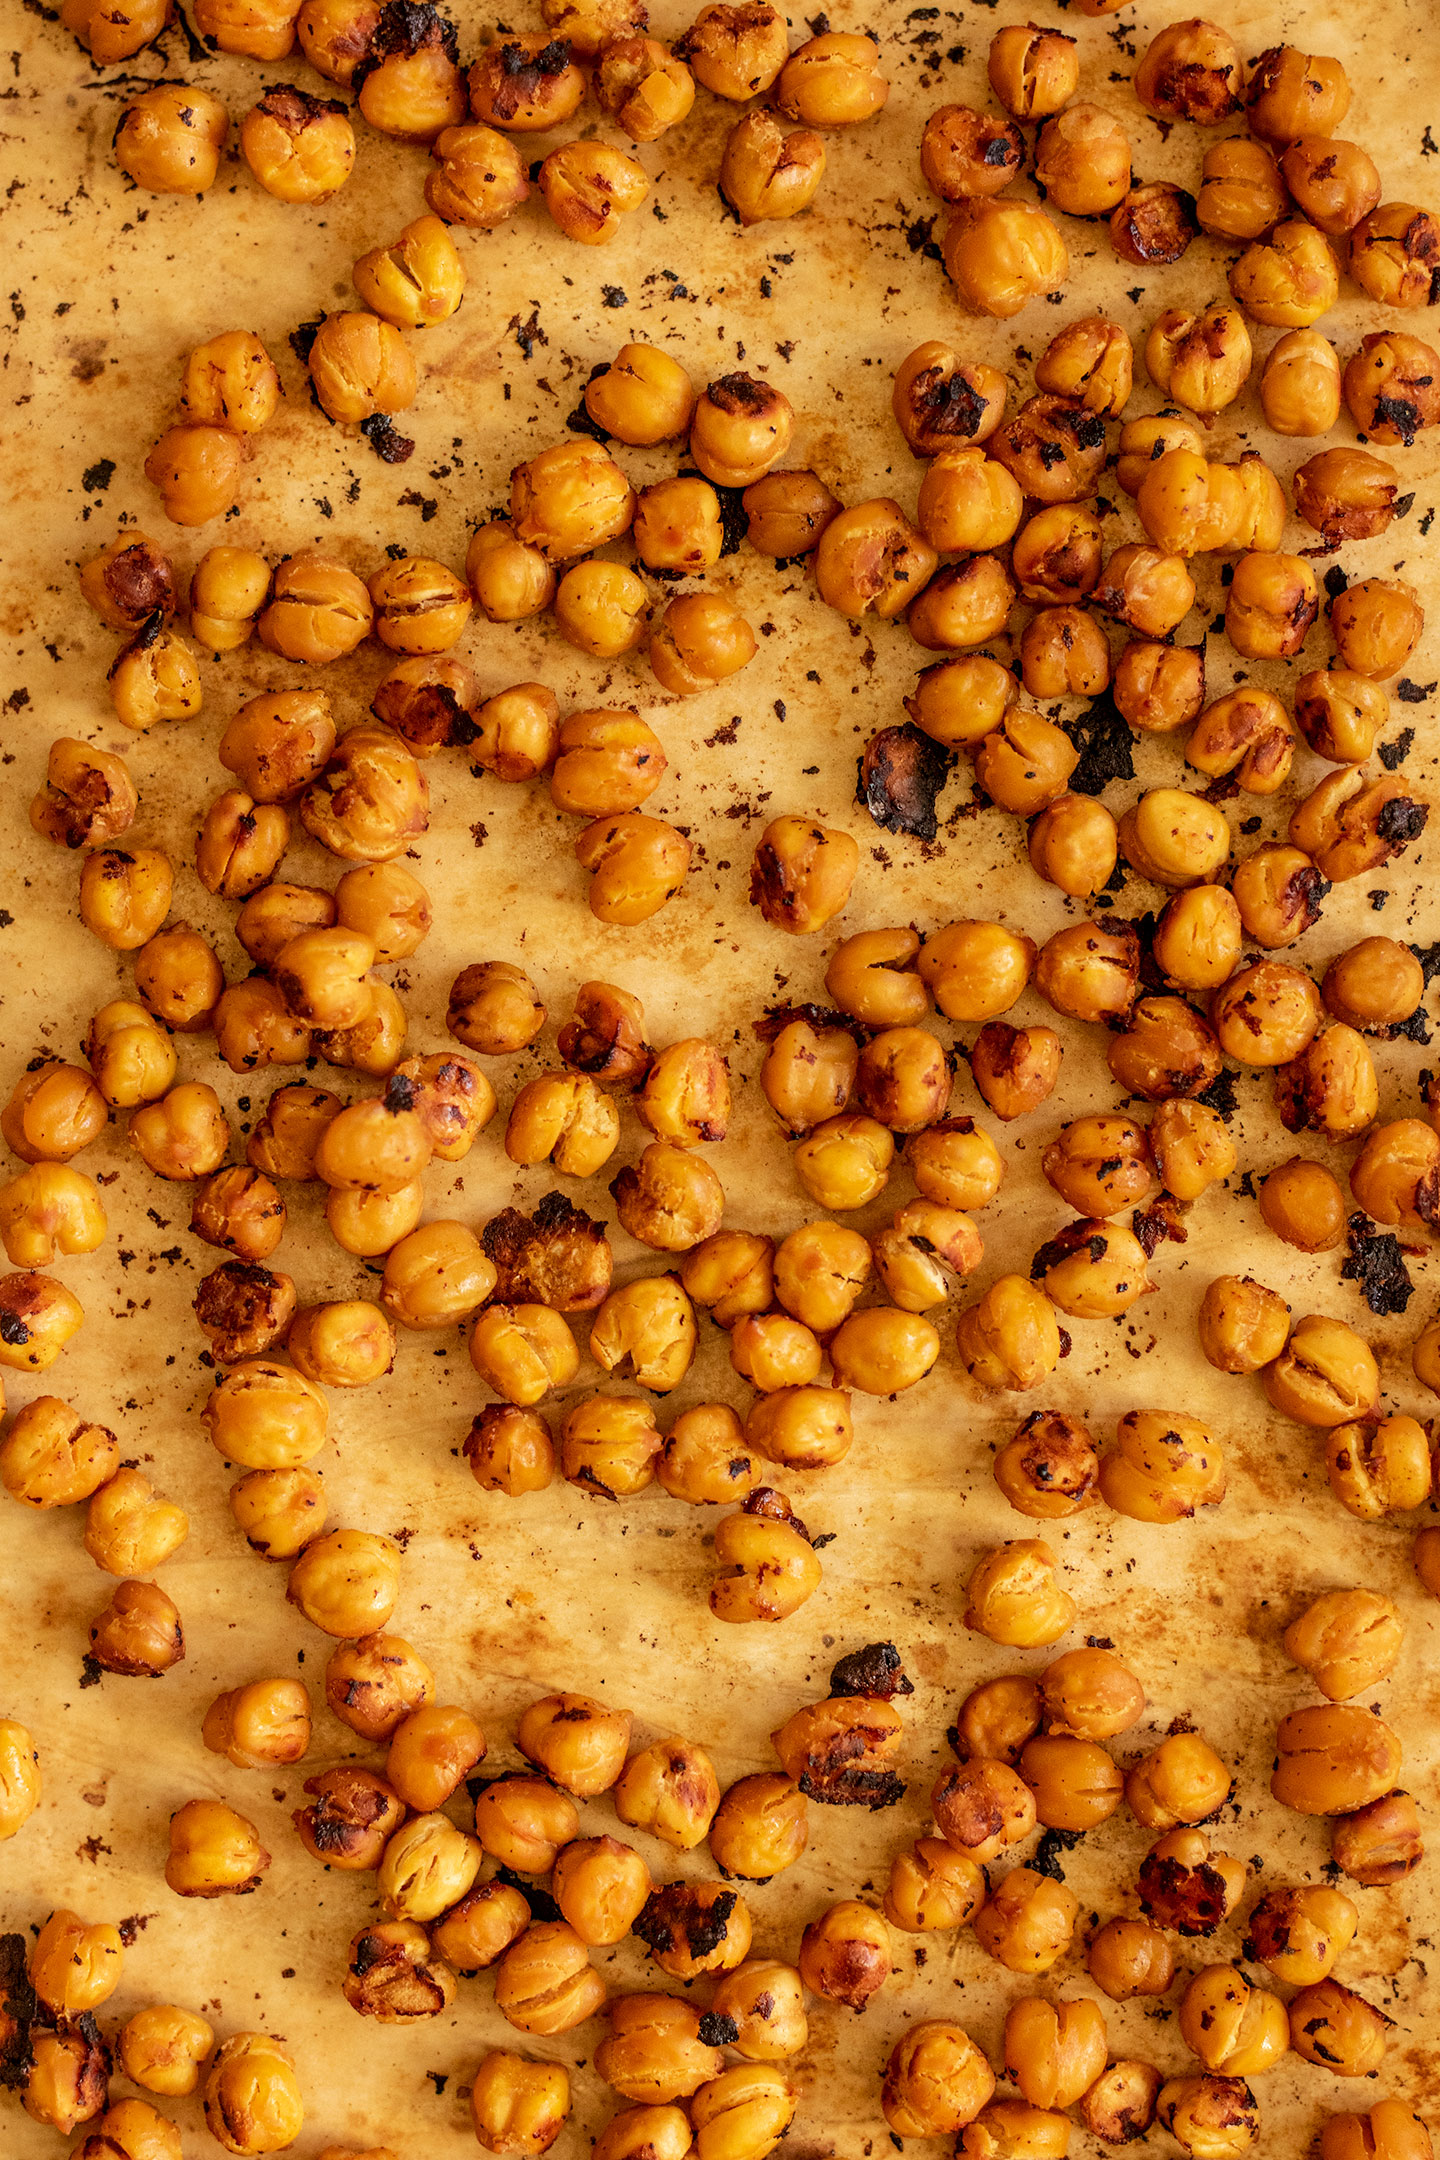 Roasted chickpeas out of the oven.